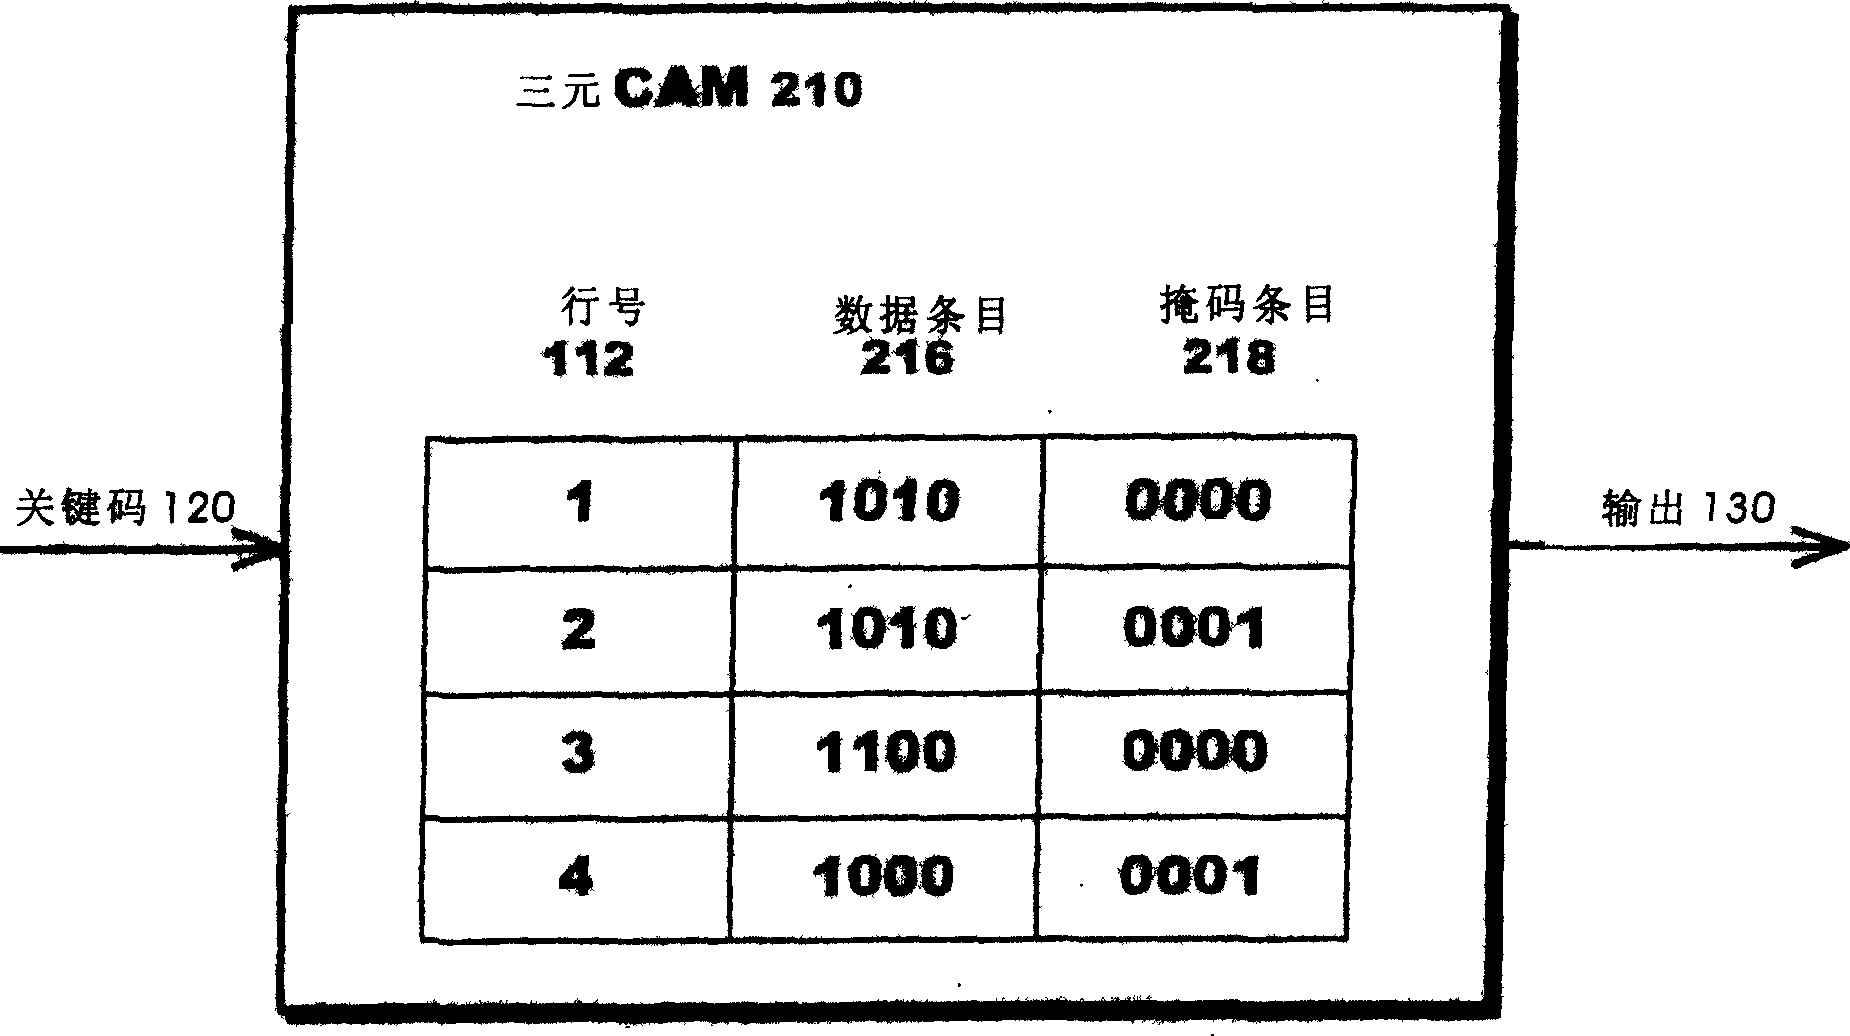 Storage system with dynamic configurable and addressable content